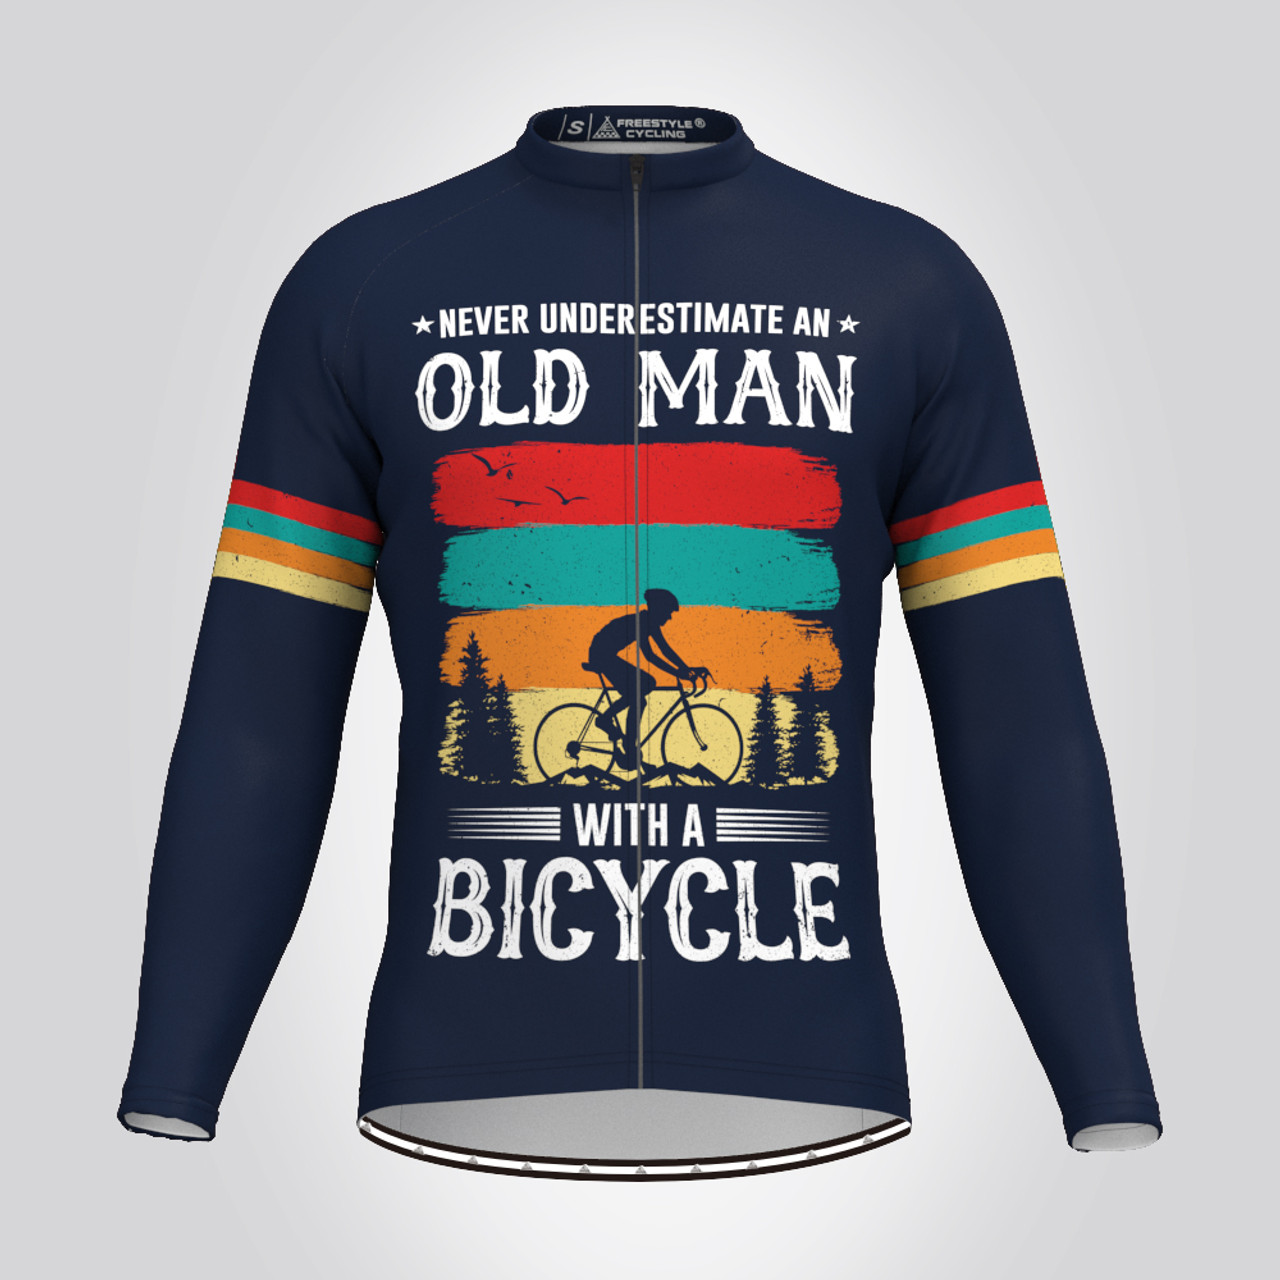 Garneau Evans Classic Long Sleeve Cycling Jersey - Cyclesport Bike Shop in  Park Ridge, Ridgewood, Westwood, Saddle River, New City, Nyack and Bergen  County.